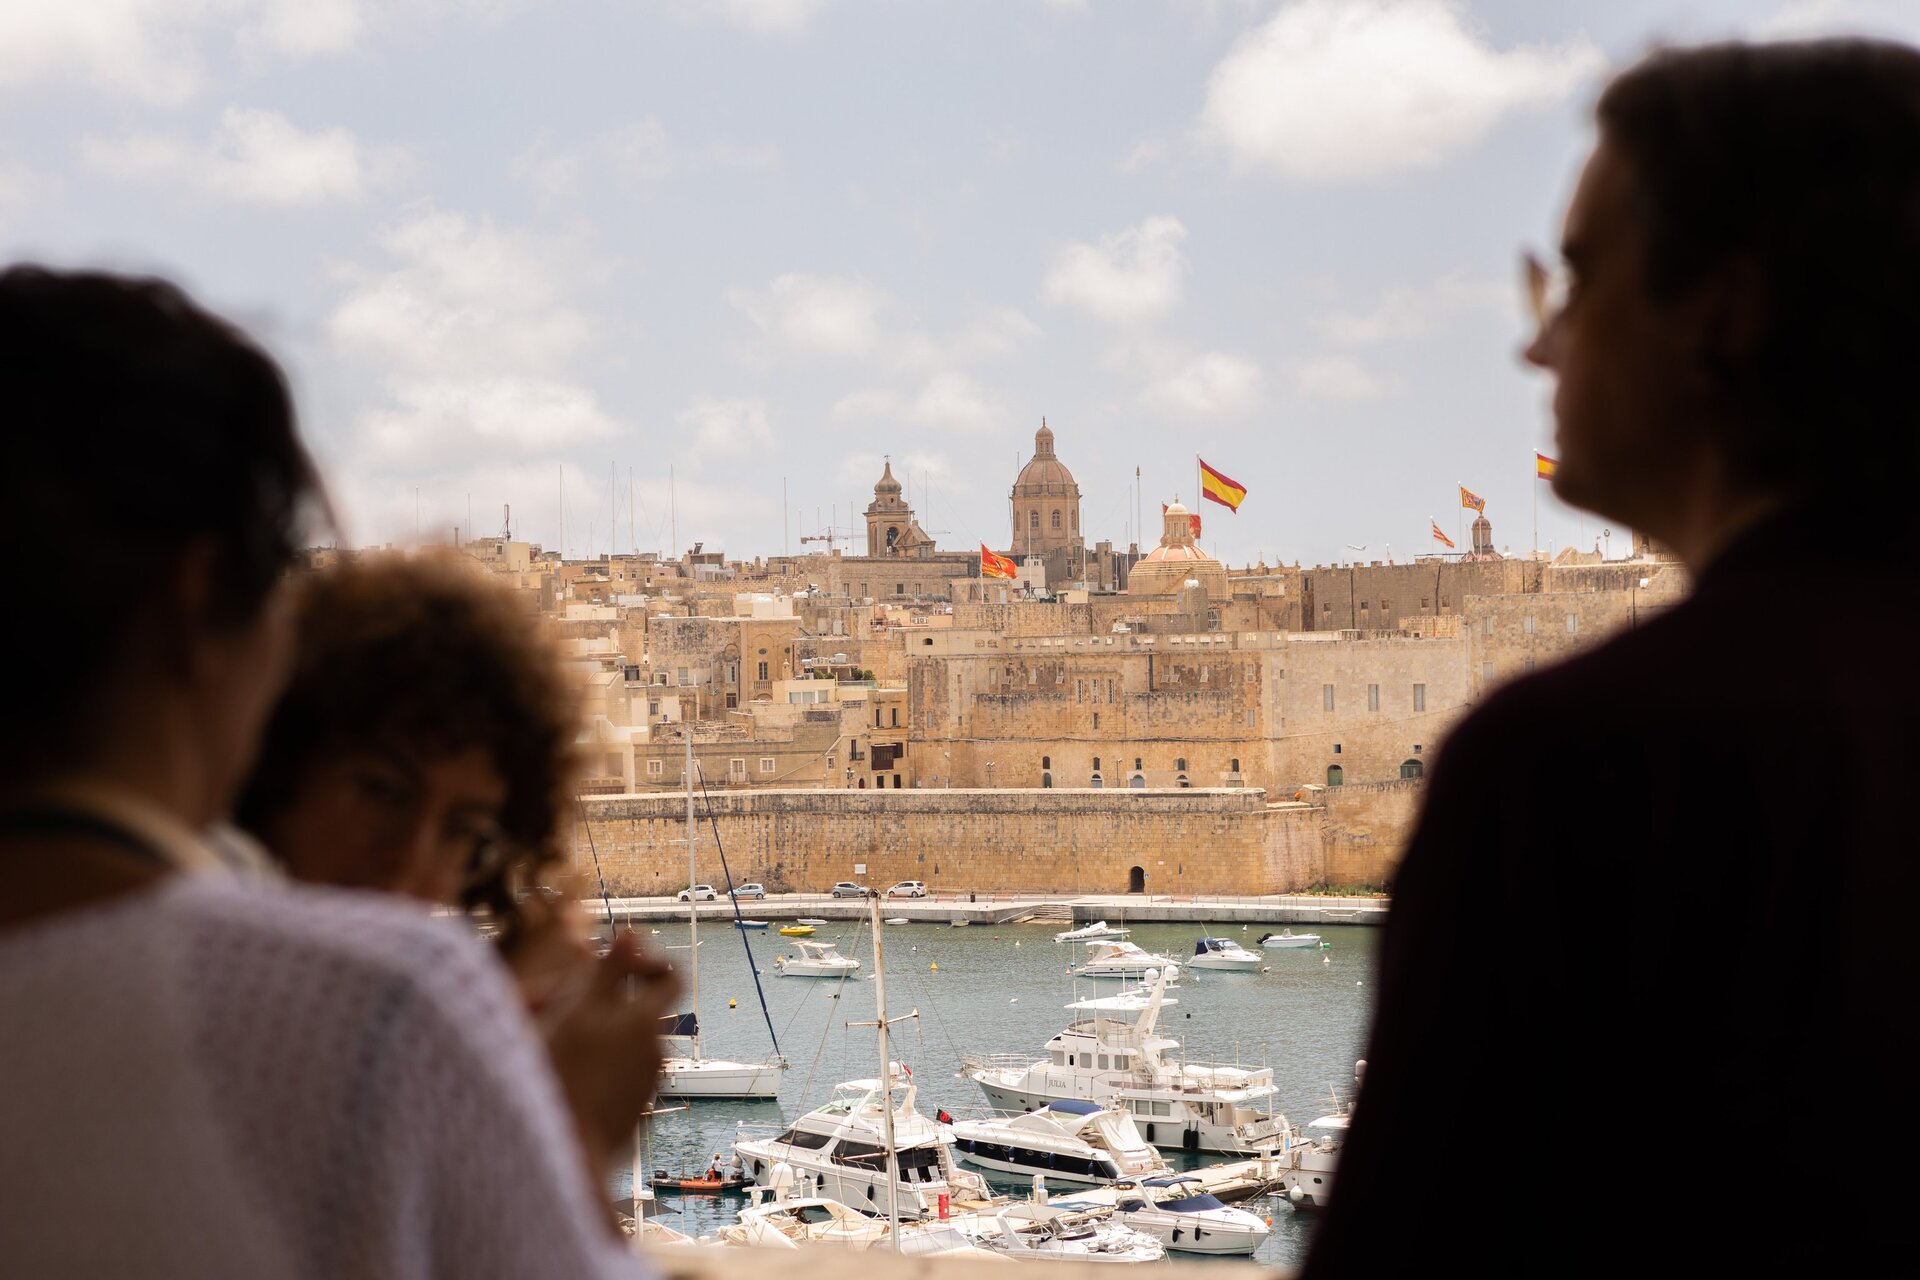 The 2023 edition of the Ecsite Conference took place from 15 to 17 June in Malta and saw the participation of 850 attendees and 350 expert speakers from over 50 countries.